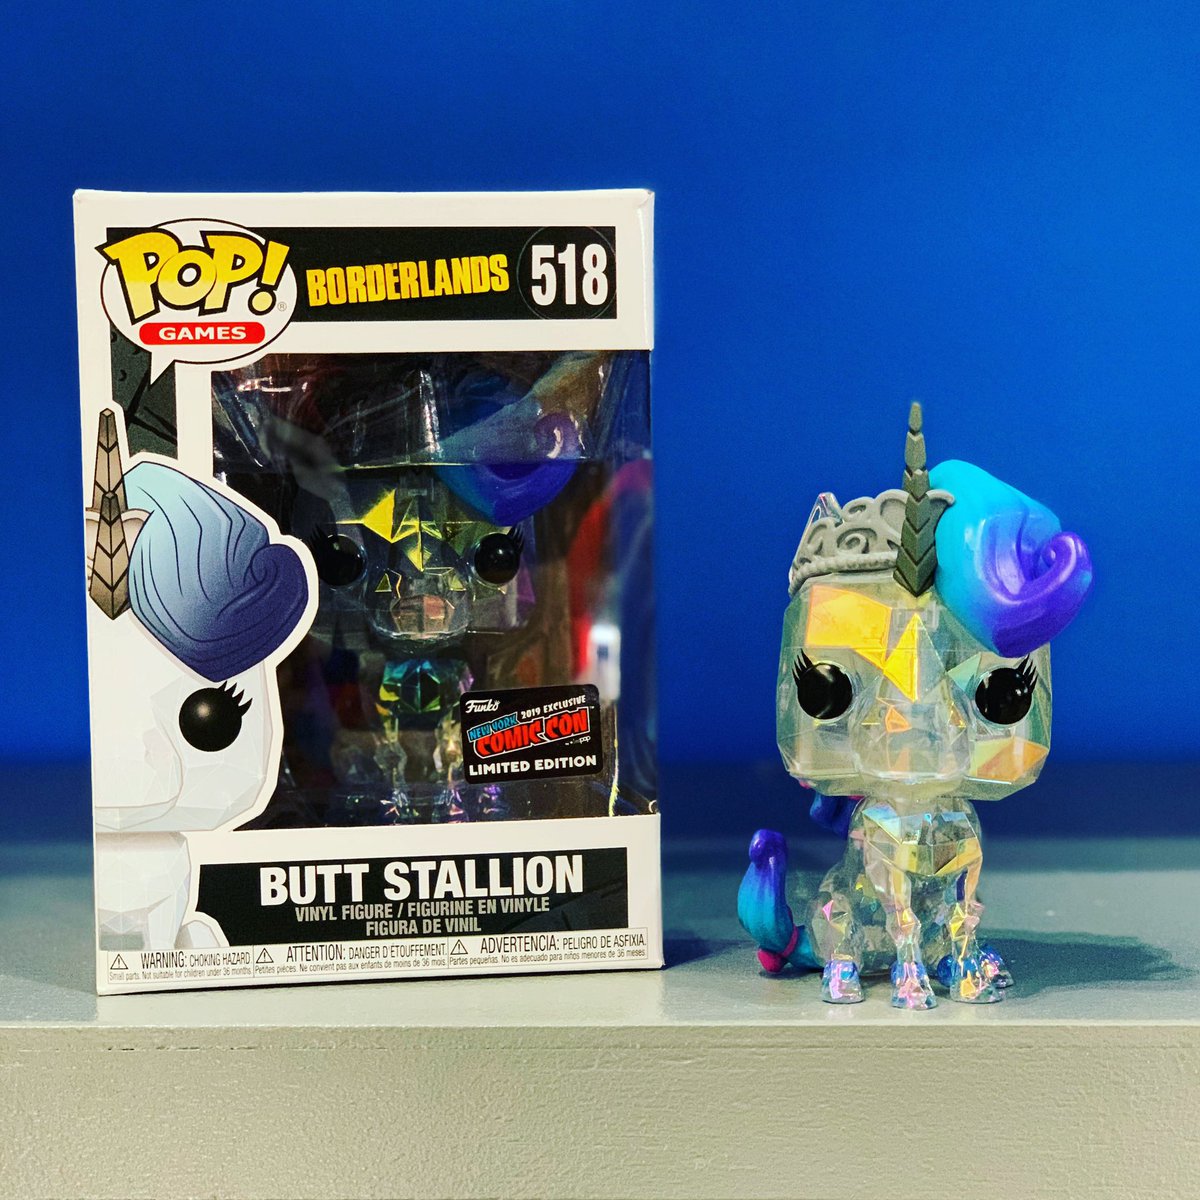 Here’s an out of box look at our @NY_Comic_Con exclusive Butt Stallion Pop! ✨ Which @Borderlands Pop! should we make next? #FunkoNYCC